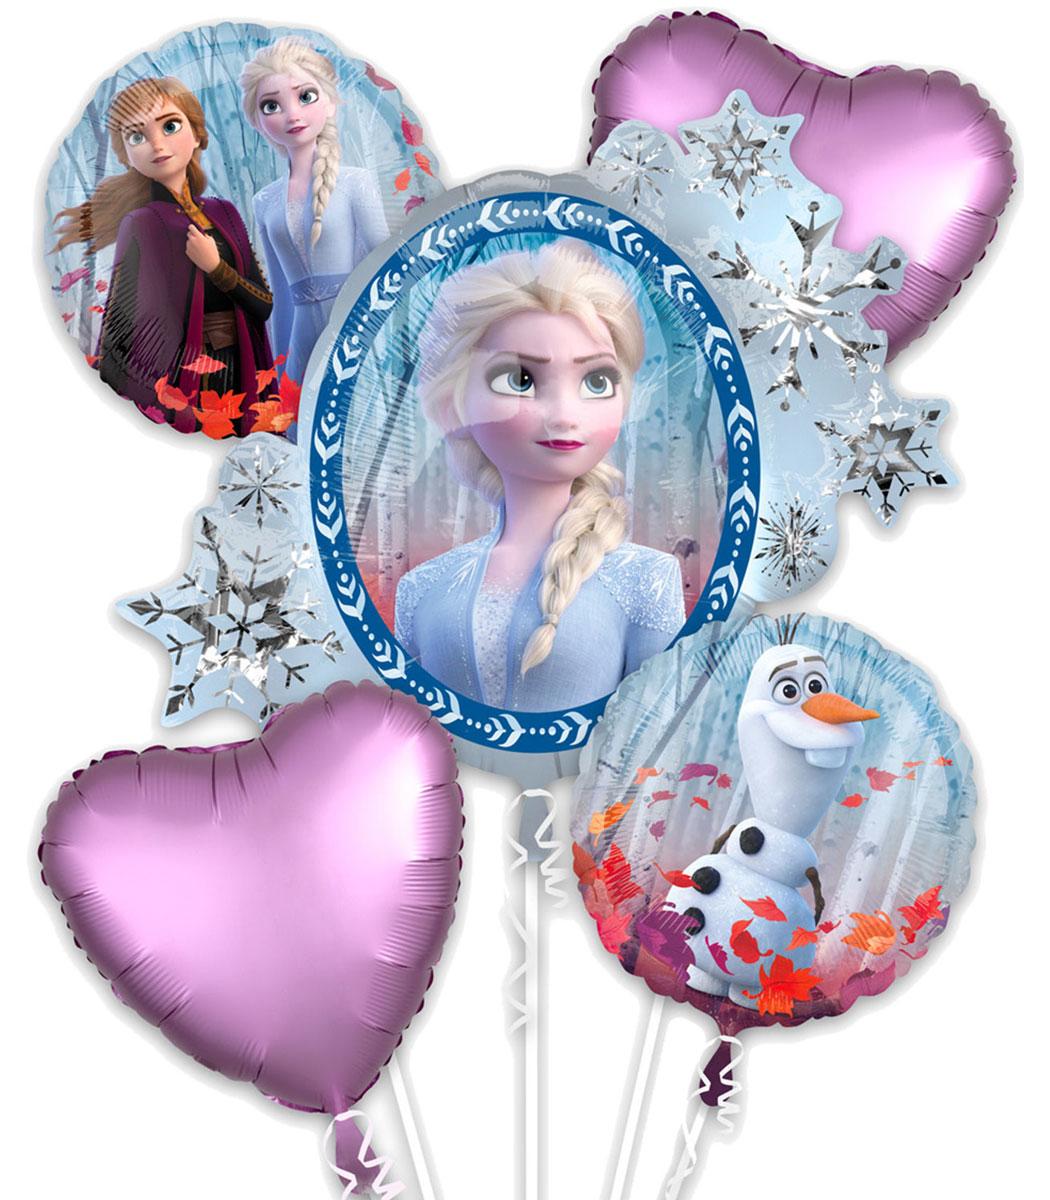 Disney Frozen II Birthday Foil Balloon Bouquet - 5pc by Amscan 4038901 available here at Karnival Costumes online party shop